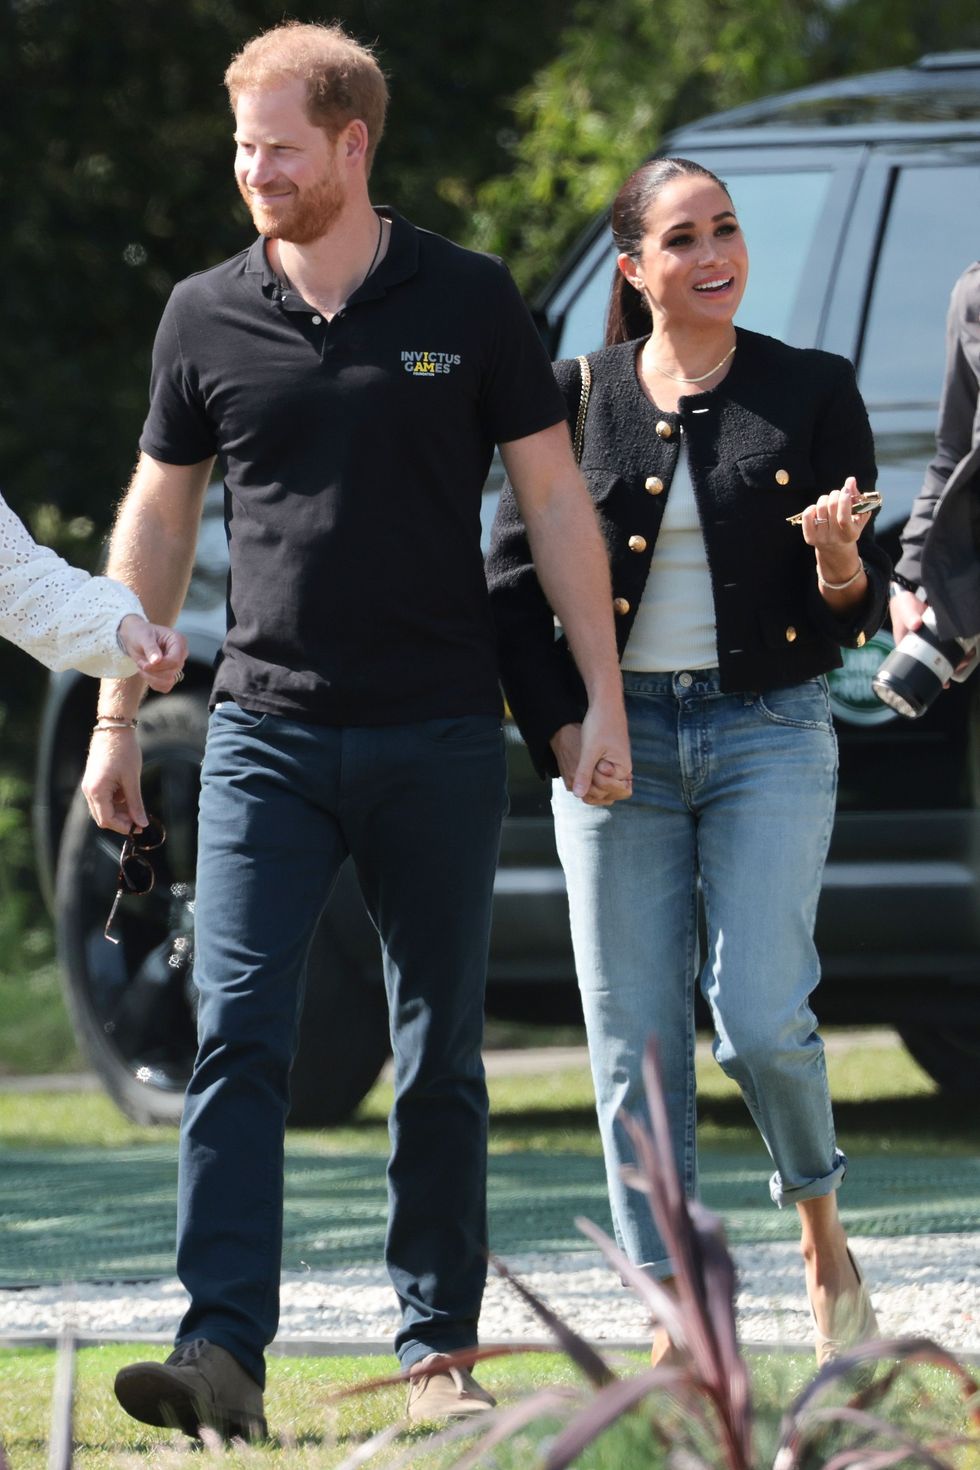 Meghan Markle Pairs a Tweed Jacket with Light-Wash Jeans for Invictus Games  Day 2